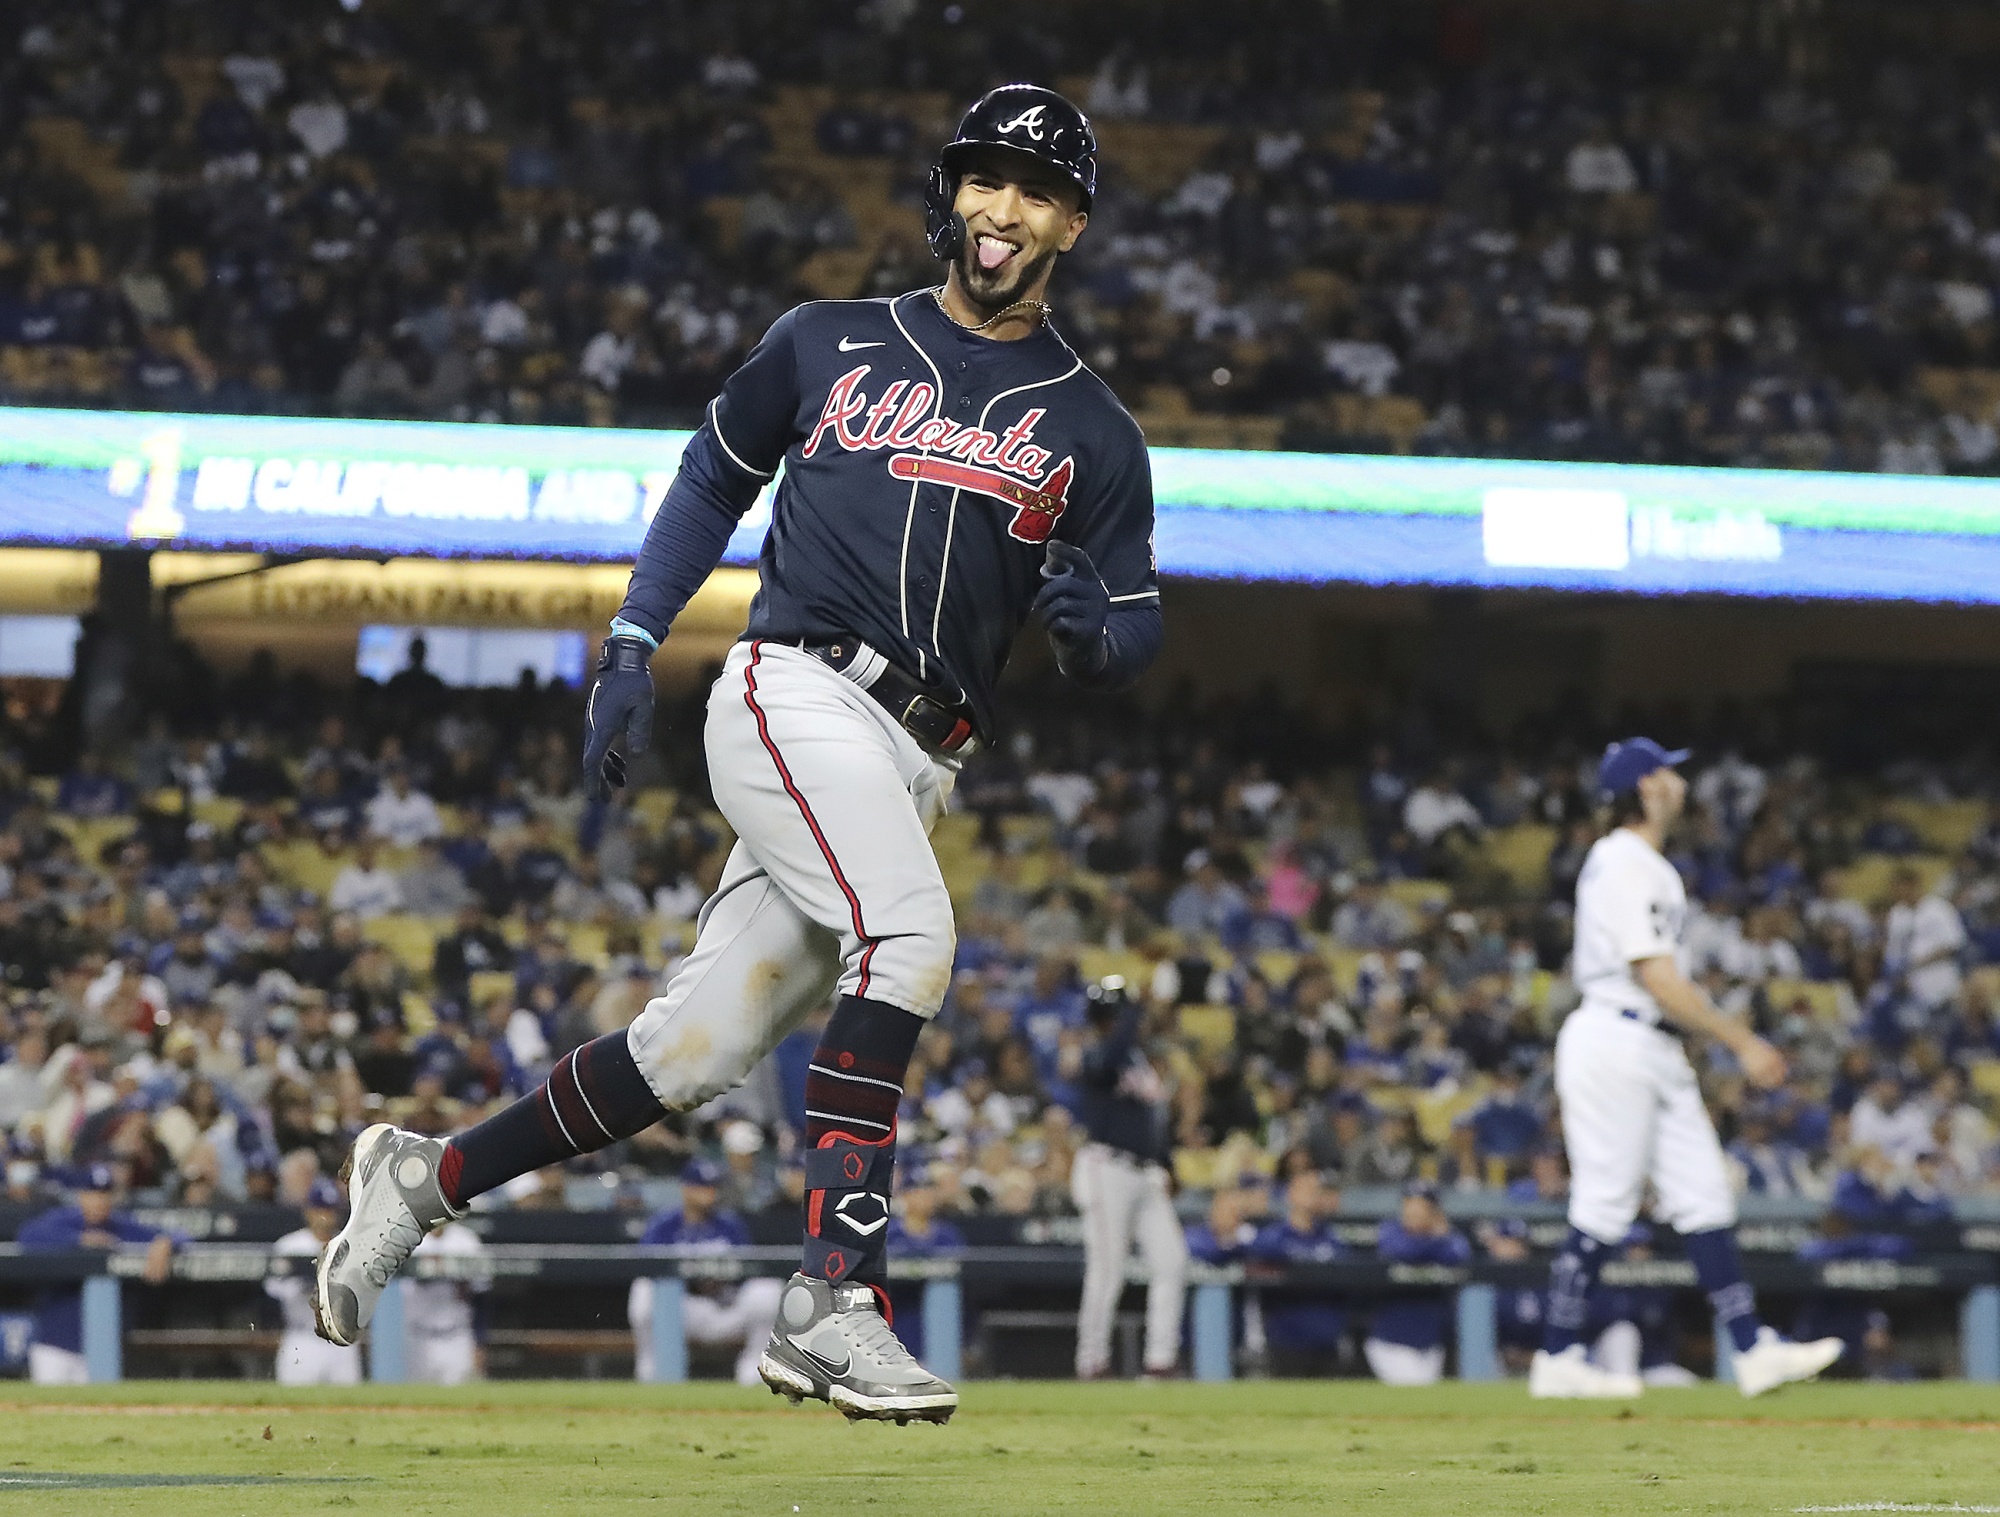 Twitter explodes watching Dodgers' Will Smith face Braves' Will Smith